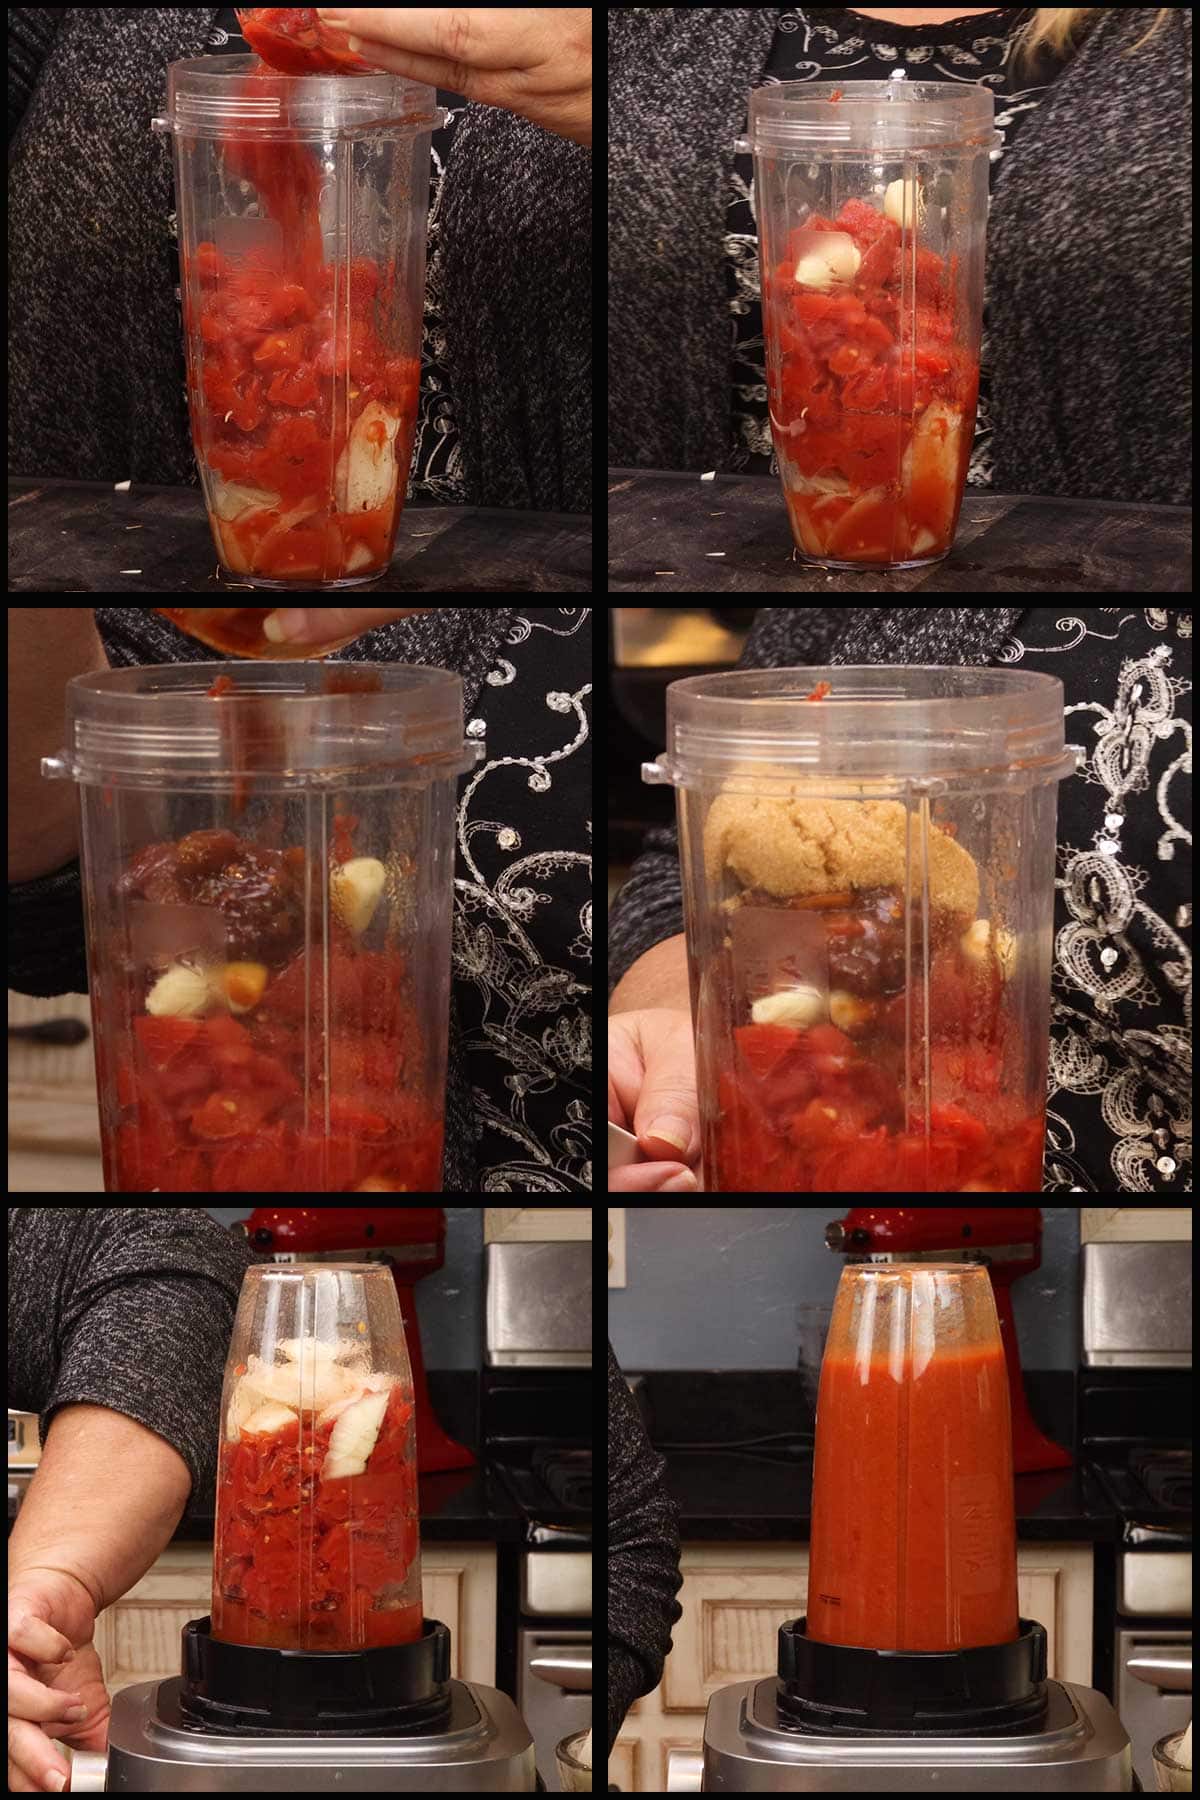 collage of pictures showing ingredients going into a blender cup and blended smooth